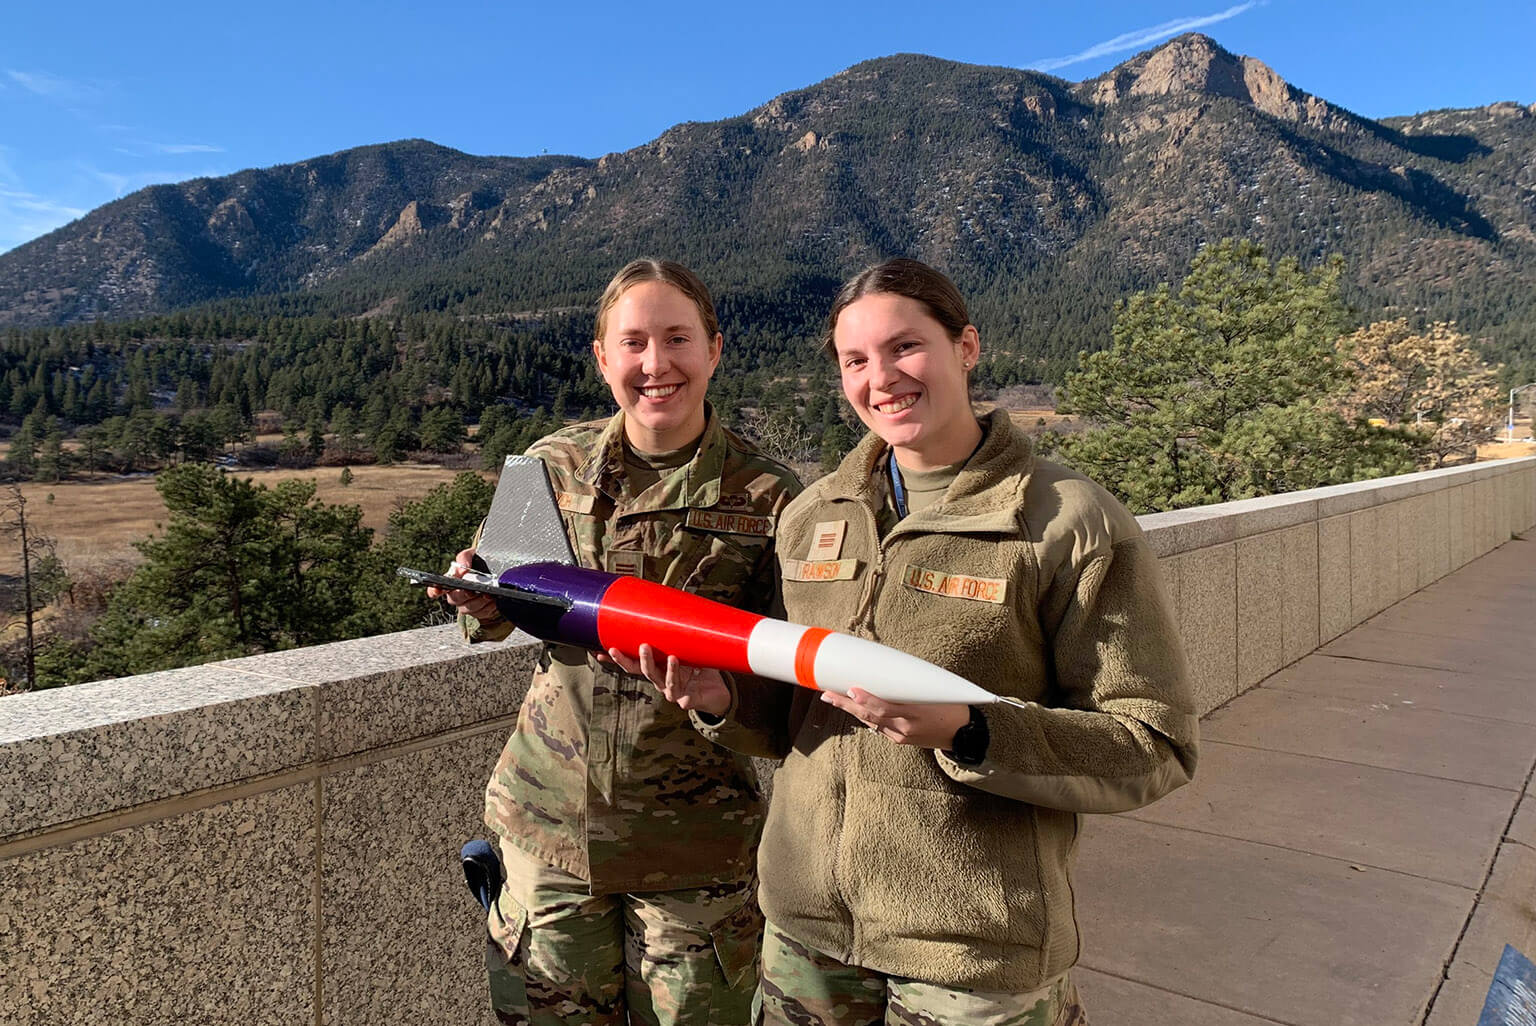 U.S. Air Force Academy Cadets 1st Class Cammie Bych and Brinley Ranson are pictured with the rocket their team built